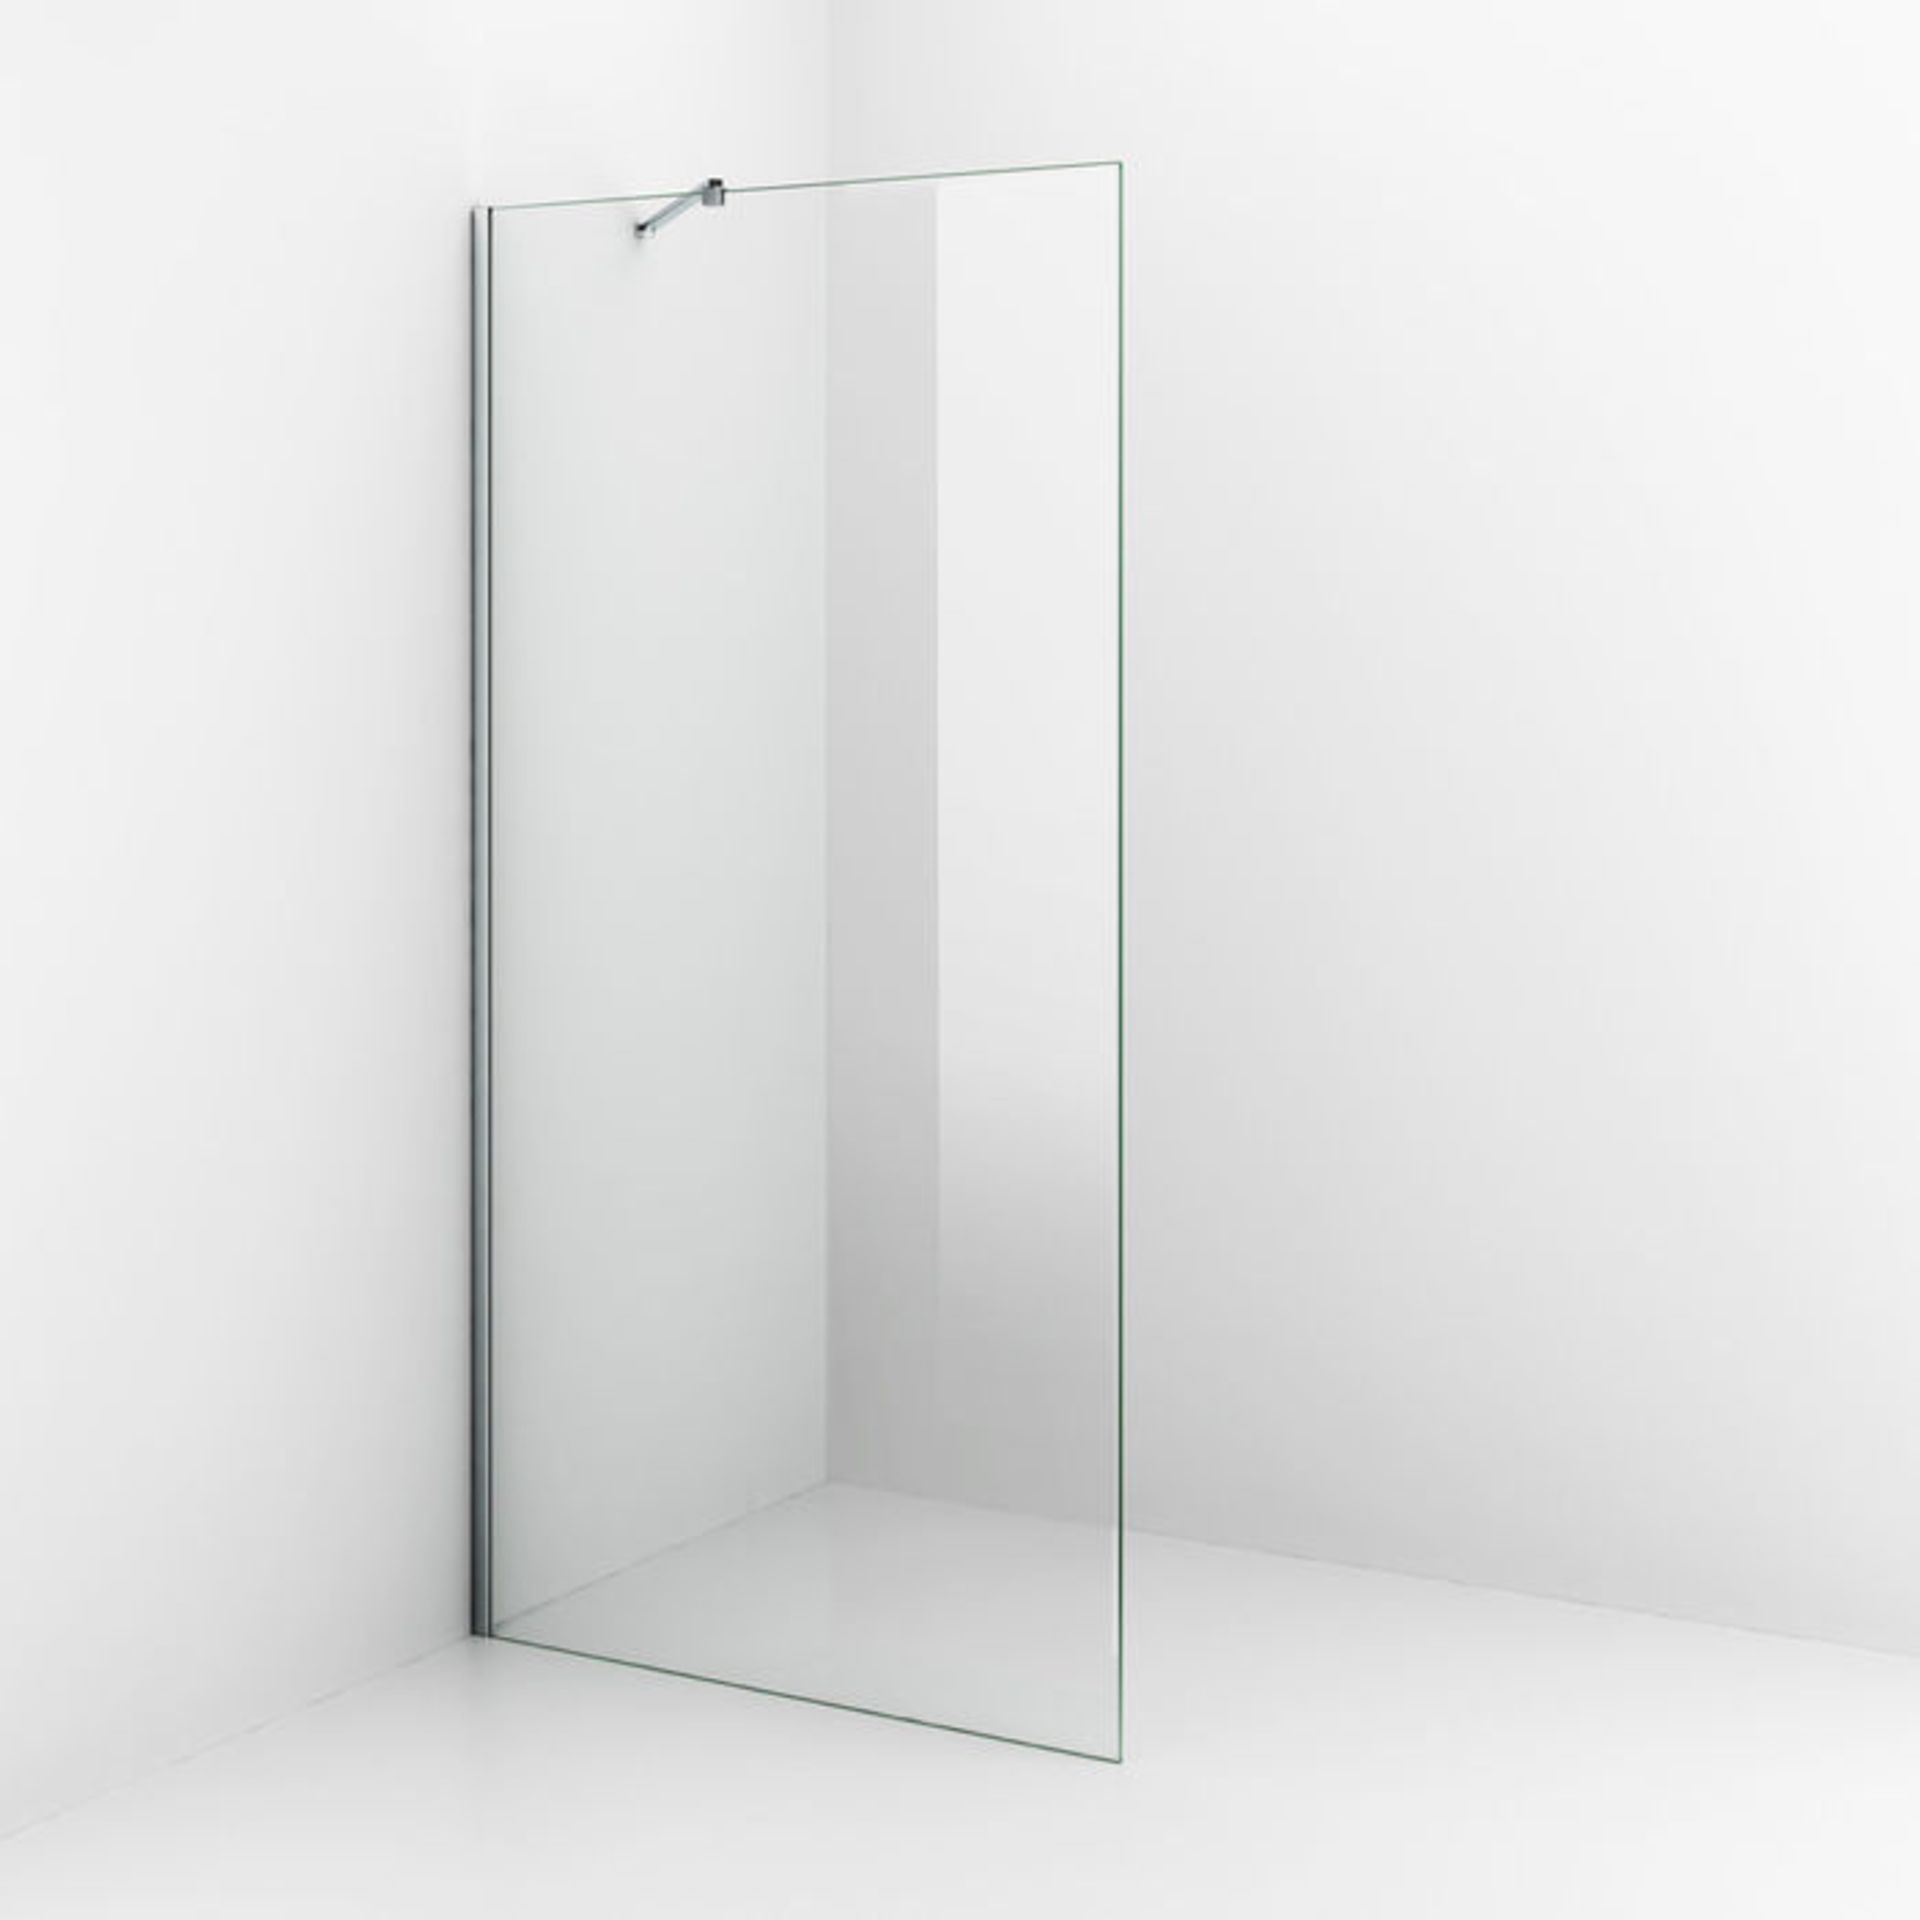 (ZA98) 1200mm - 8mm - Premium EasyClean Wetroom Panel 8mm EasyClean glass - Our glass has water- - Image 4 of 4